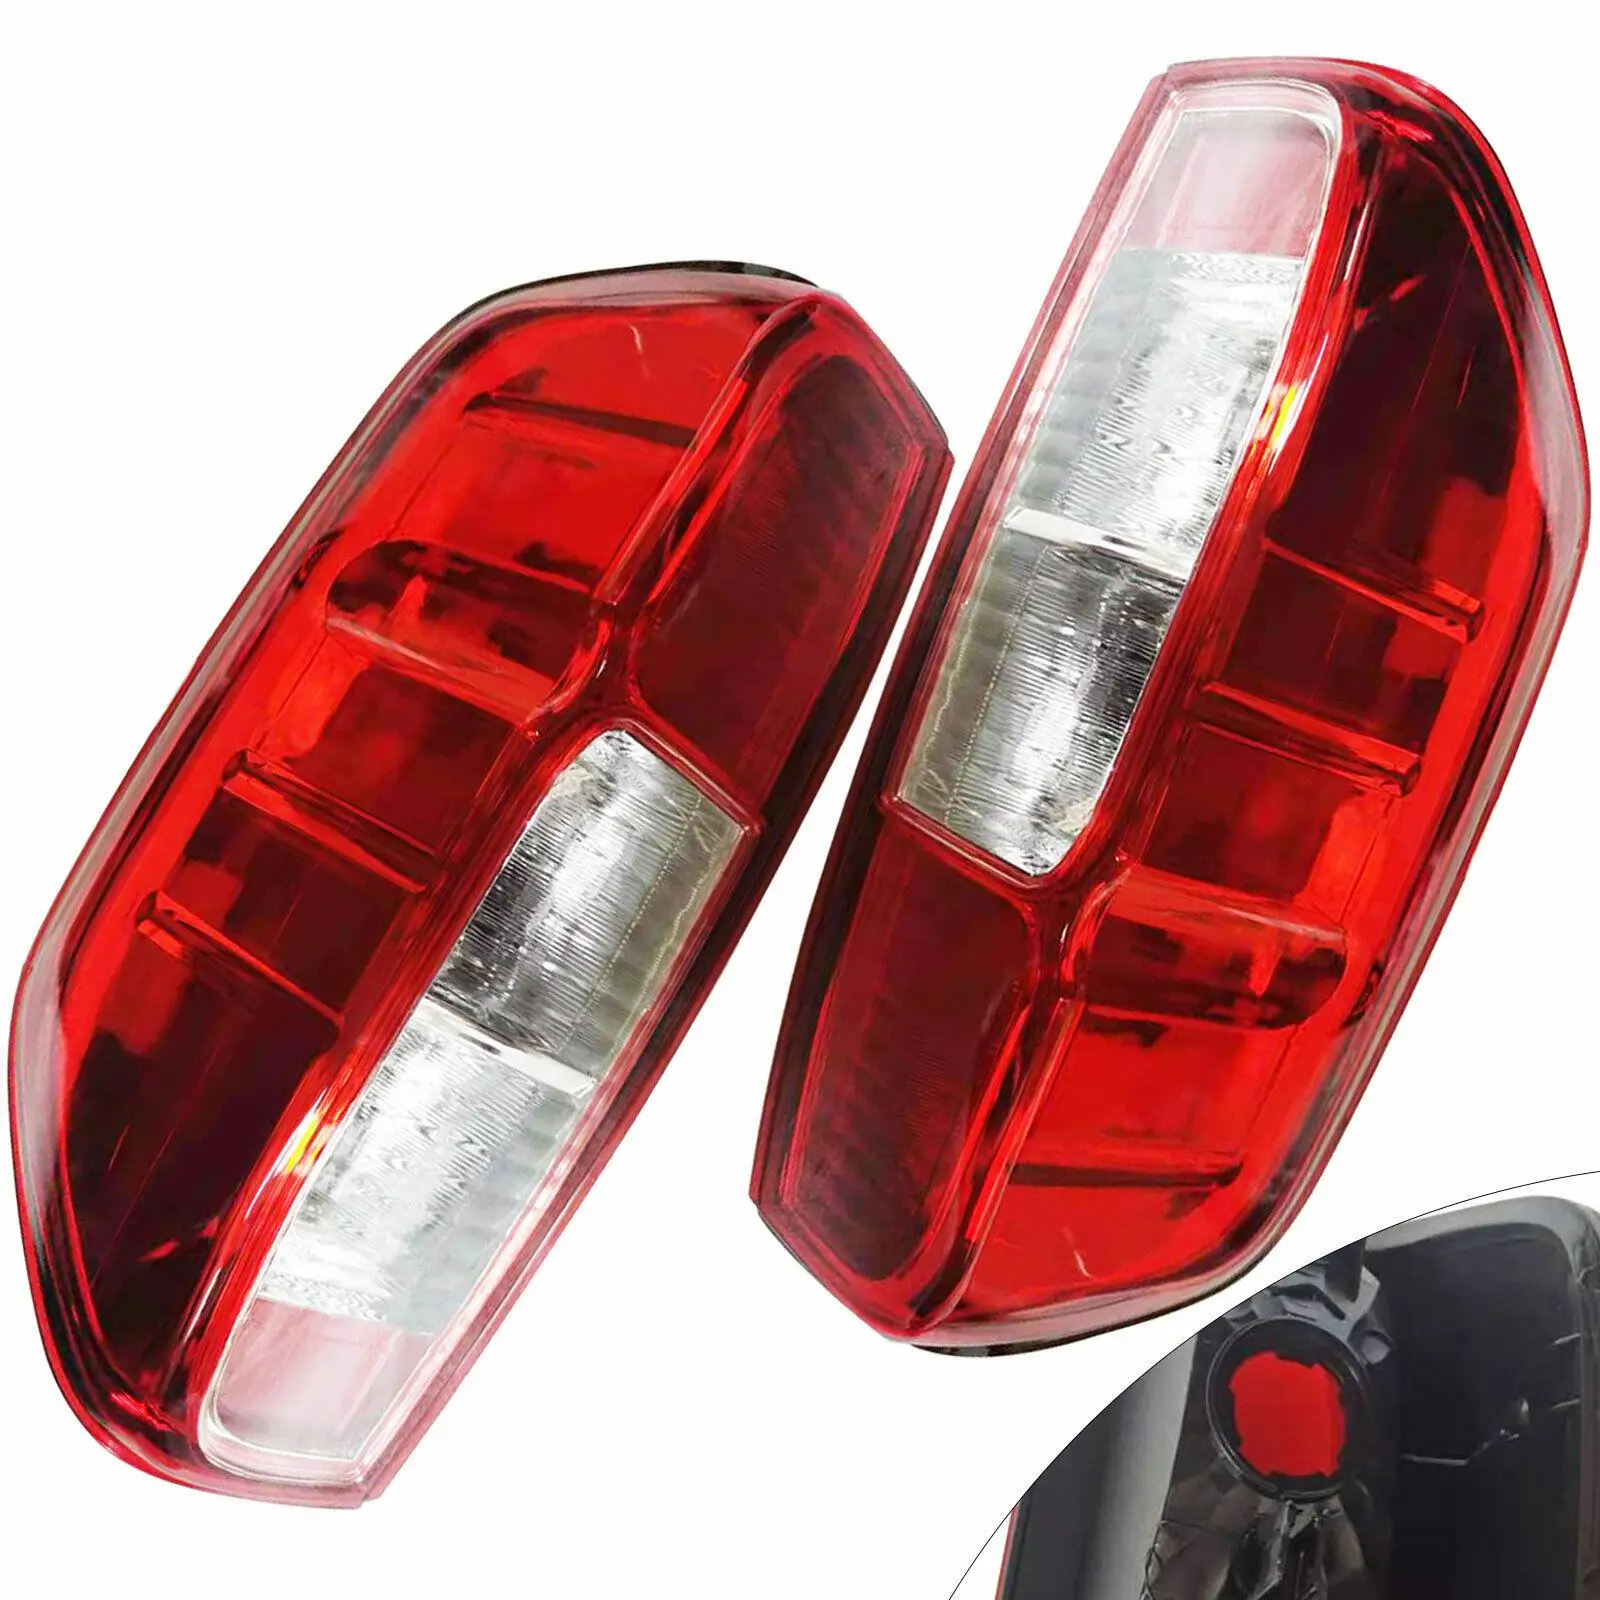 Pair Left & Right Rear Brake Lamps Tail Lights Taillamps for Nissan Frontier 2005-2015 Red Lens 1 pair led rear bumper reflector light for land rover l322 2003 2012 freelander 2 lr2 08 13 tail stop brake lights car parts